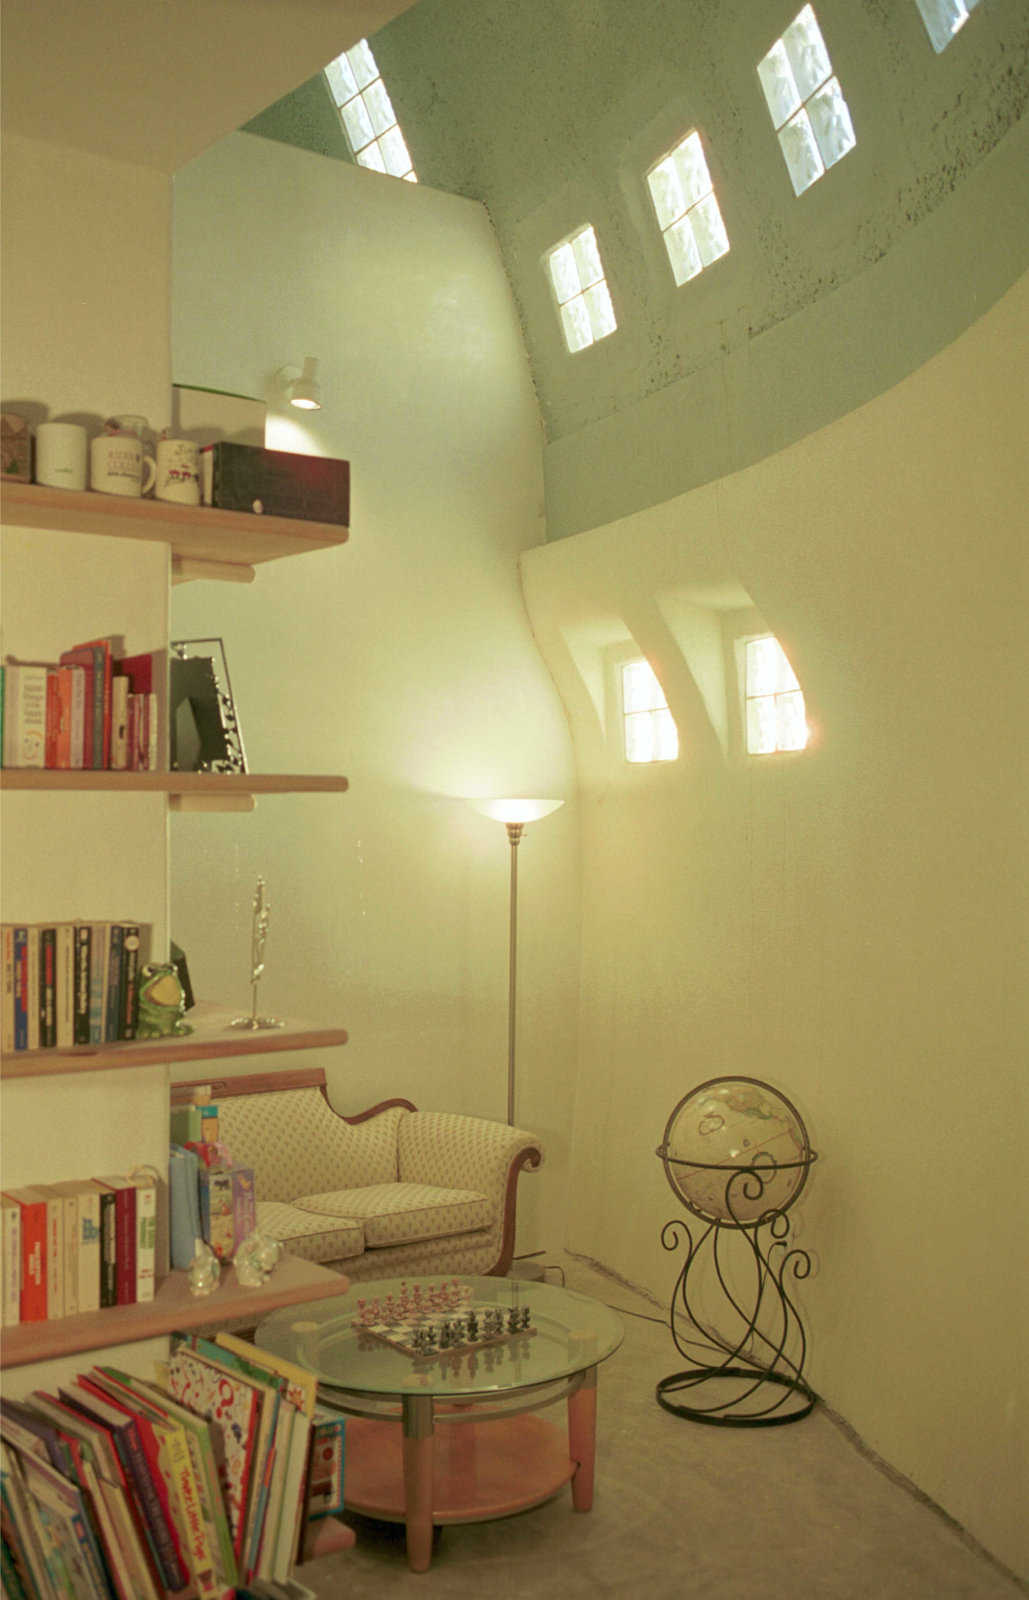 Library — The high ceiling has glass blocks that provide light for this U-shaped library with a secluded reading area.